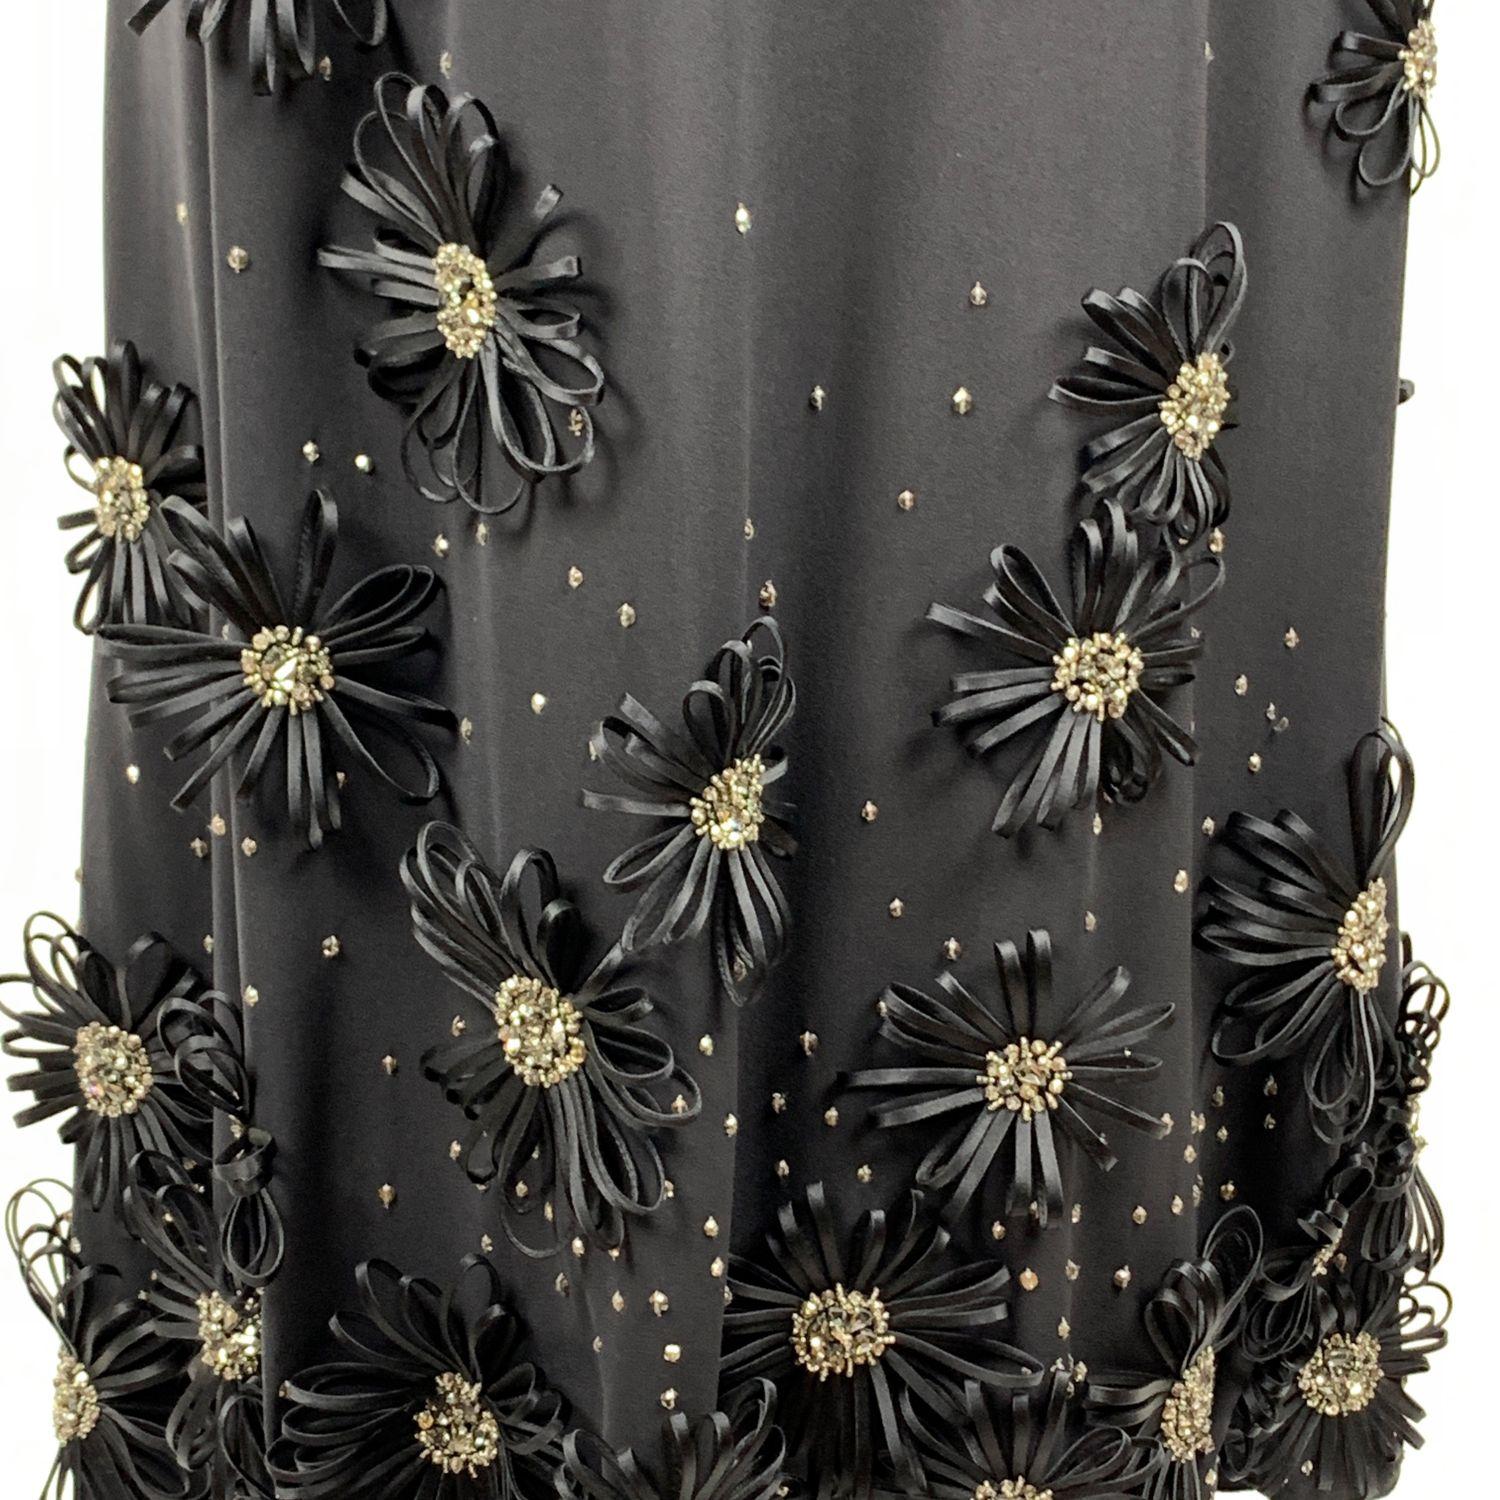 Elegant VALENTINO silk embellished evening maxi dress in black color. Beautiful fabirc flowers applique with rhinestones and beads accents. Straight neckline with built-in bra. Spaghetti strap. Side zip closure. Very light silk lining. Size is not